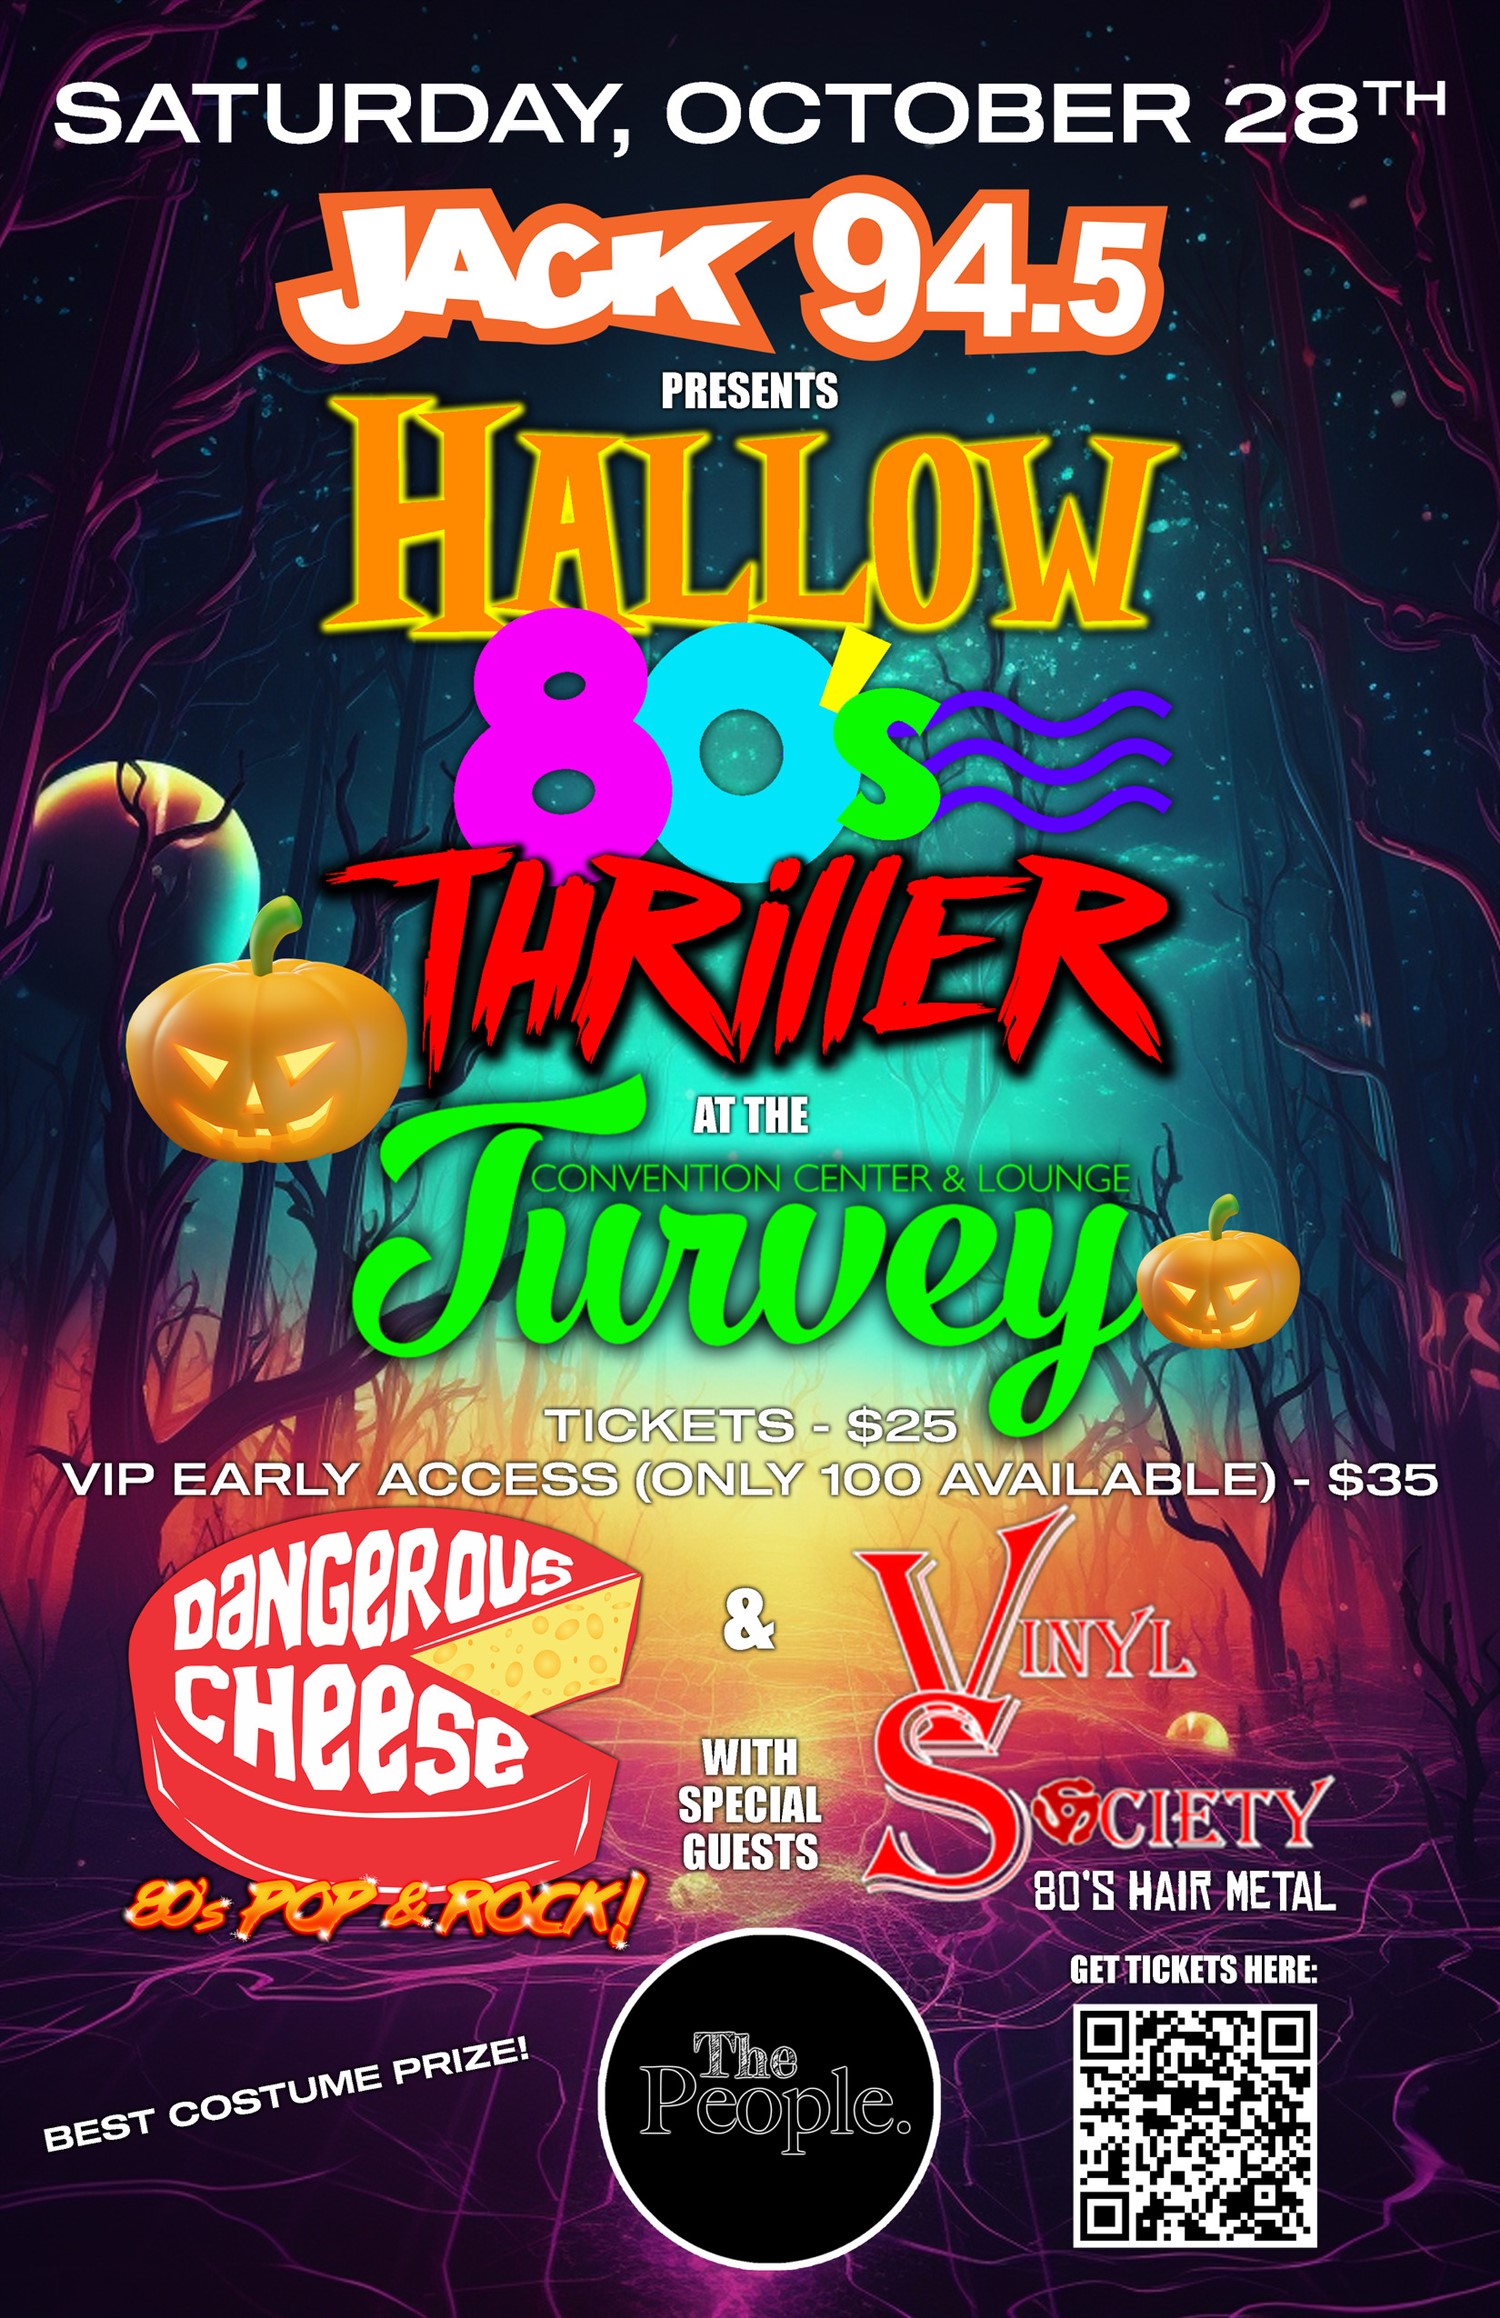 Hallow 80s Thriller Presented by Jack 94.5 FM Vinyl Society, Dangerous Cheese & The People on Oct 28, 19:30@TURVEY Center - Buy tickets and Get information on Turvey Convention Center 